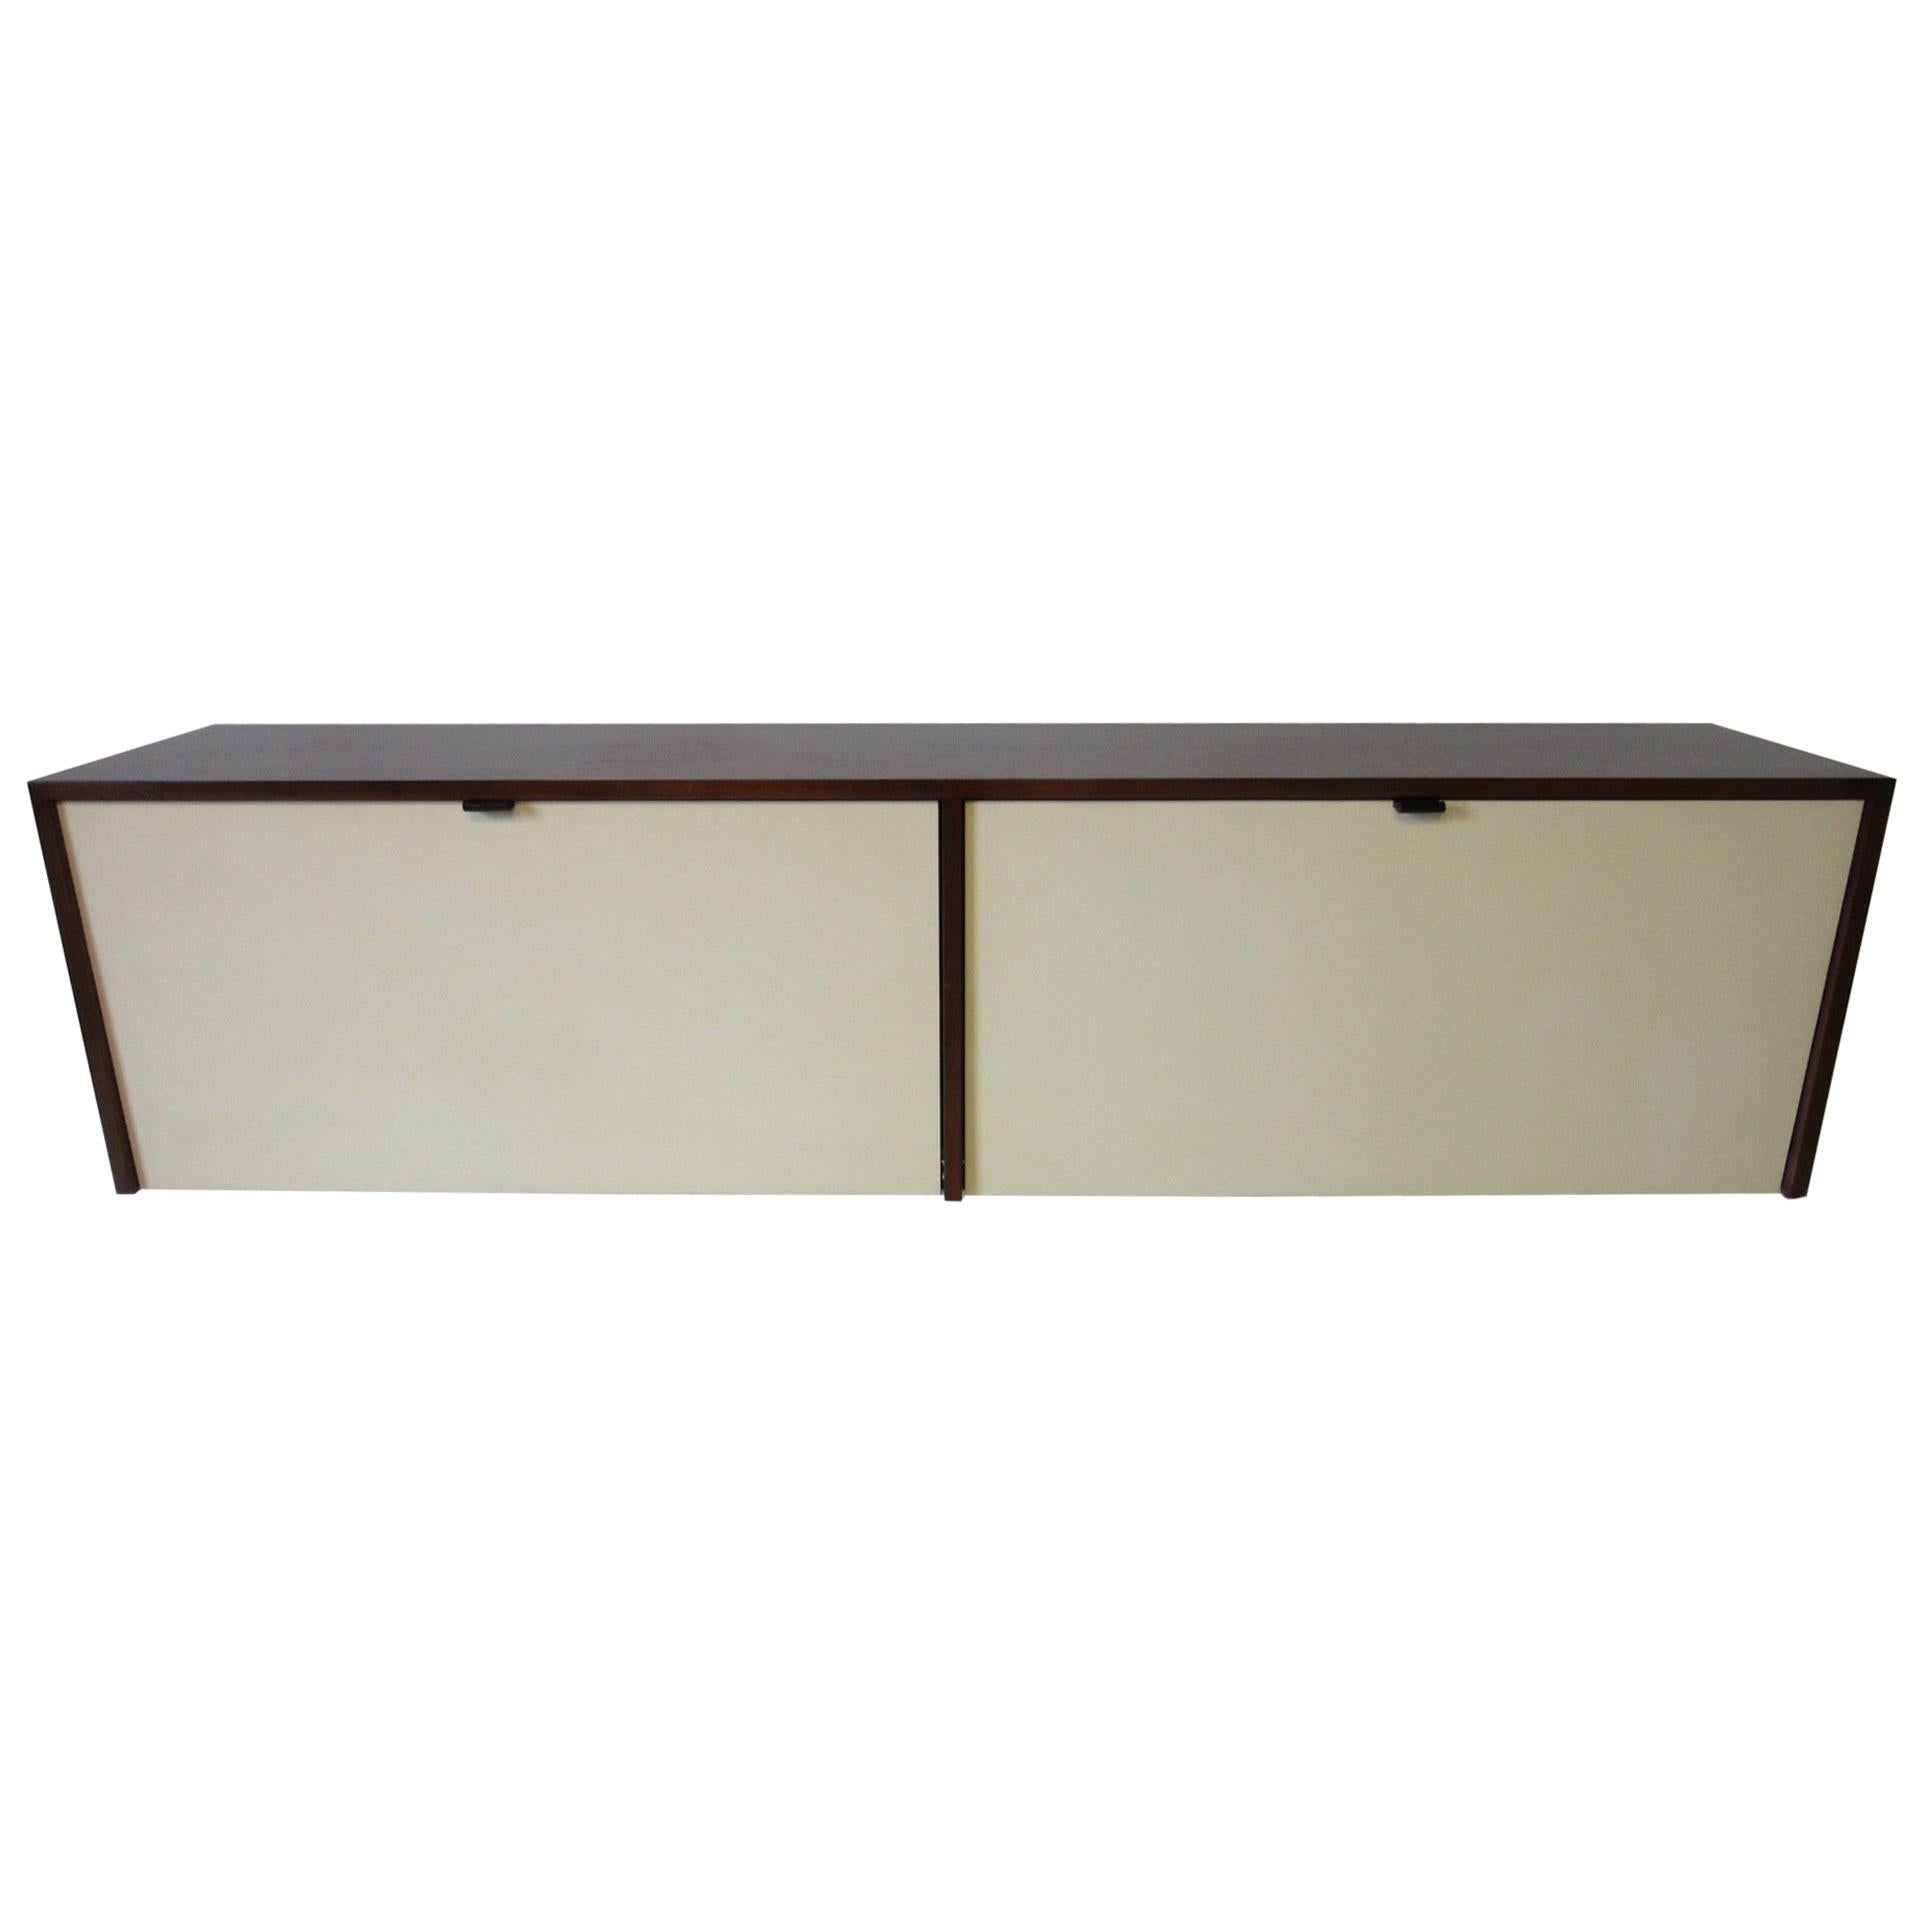 Knoll Hanging Credenza / Cabinet Designed by Florence Knoll